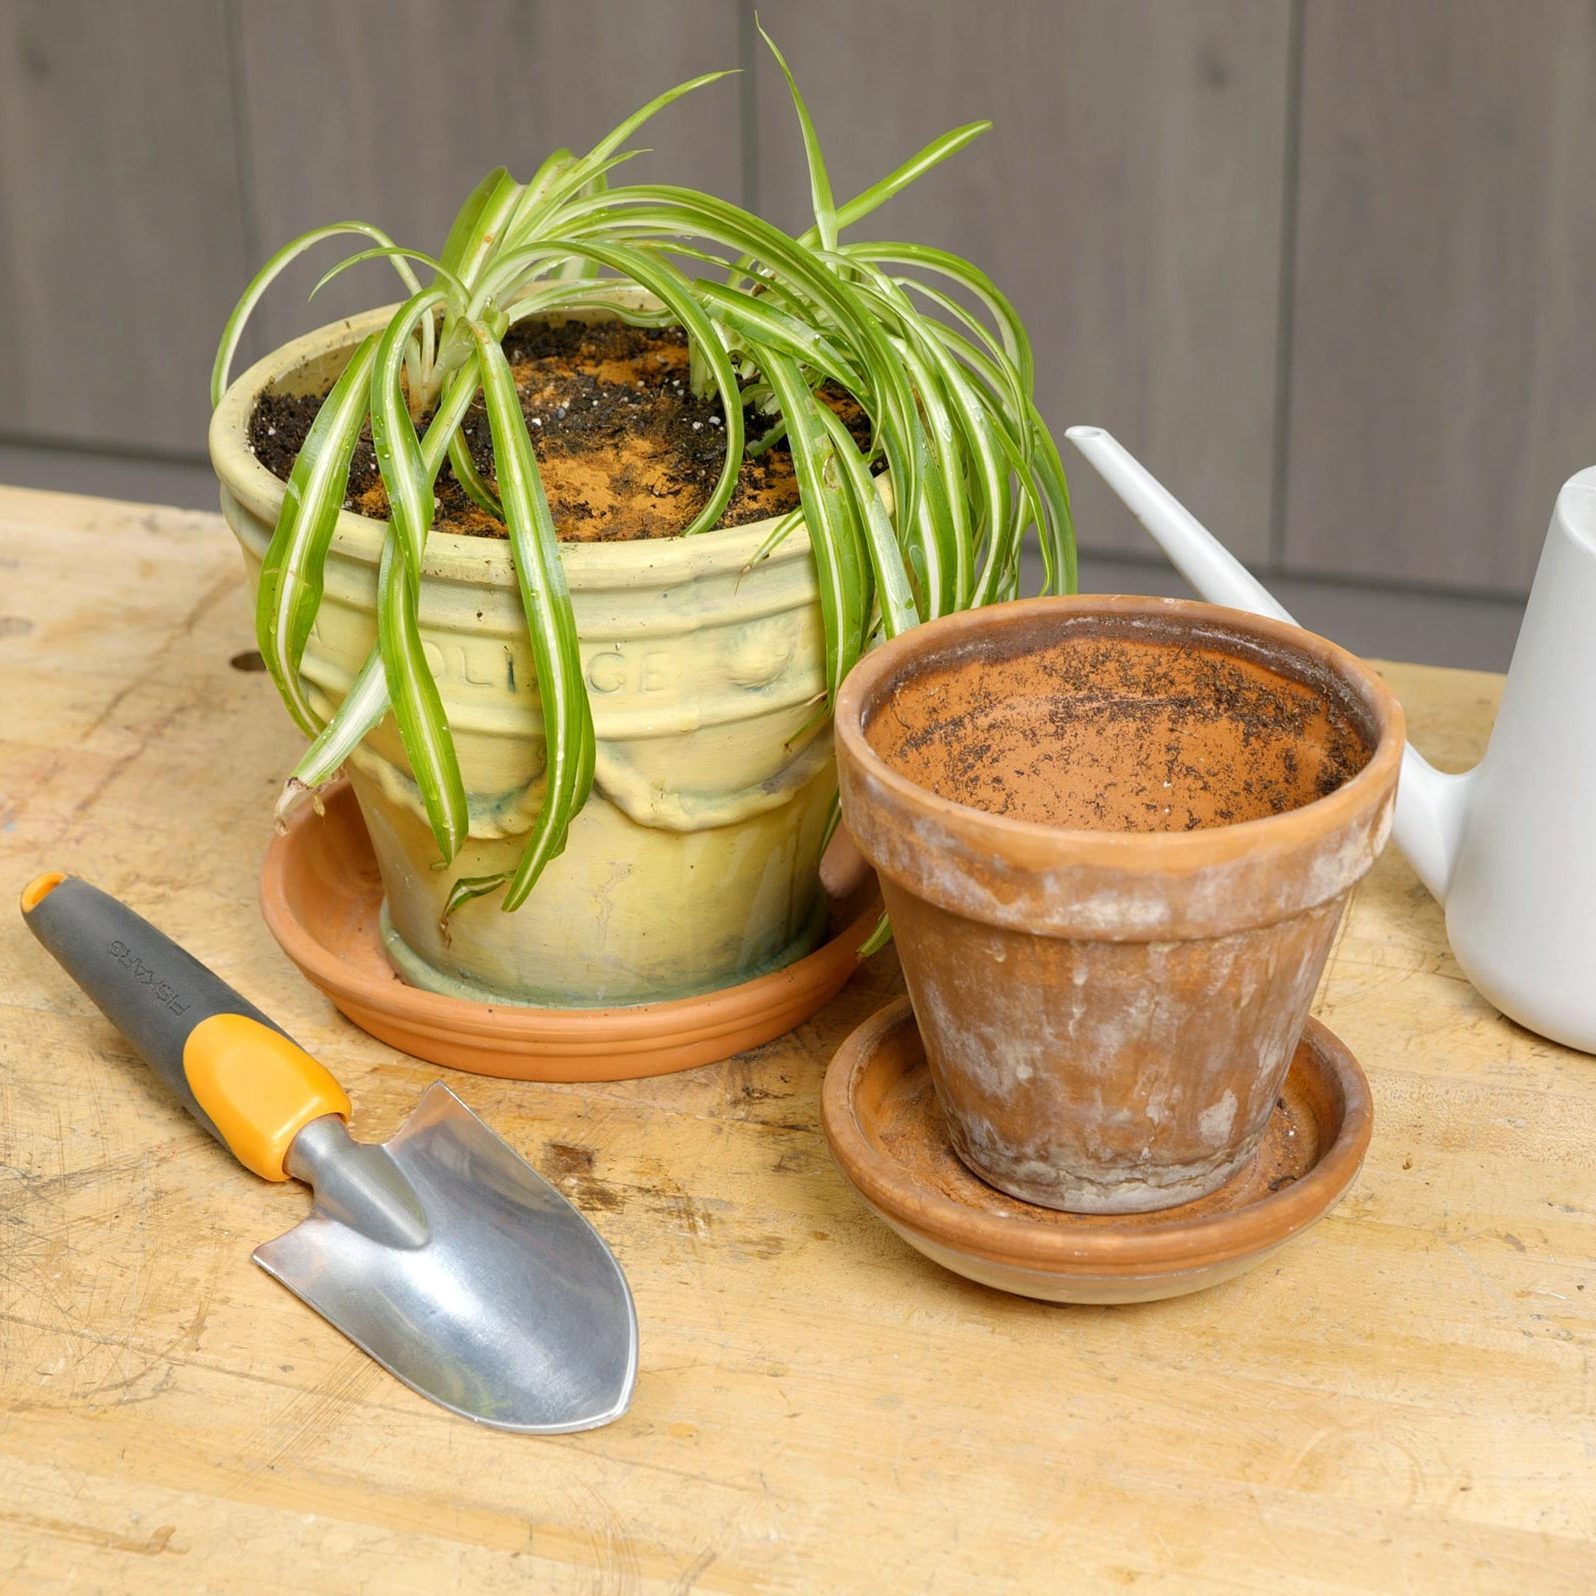 How To Repot a Plant